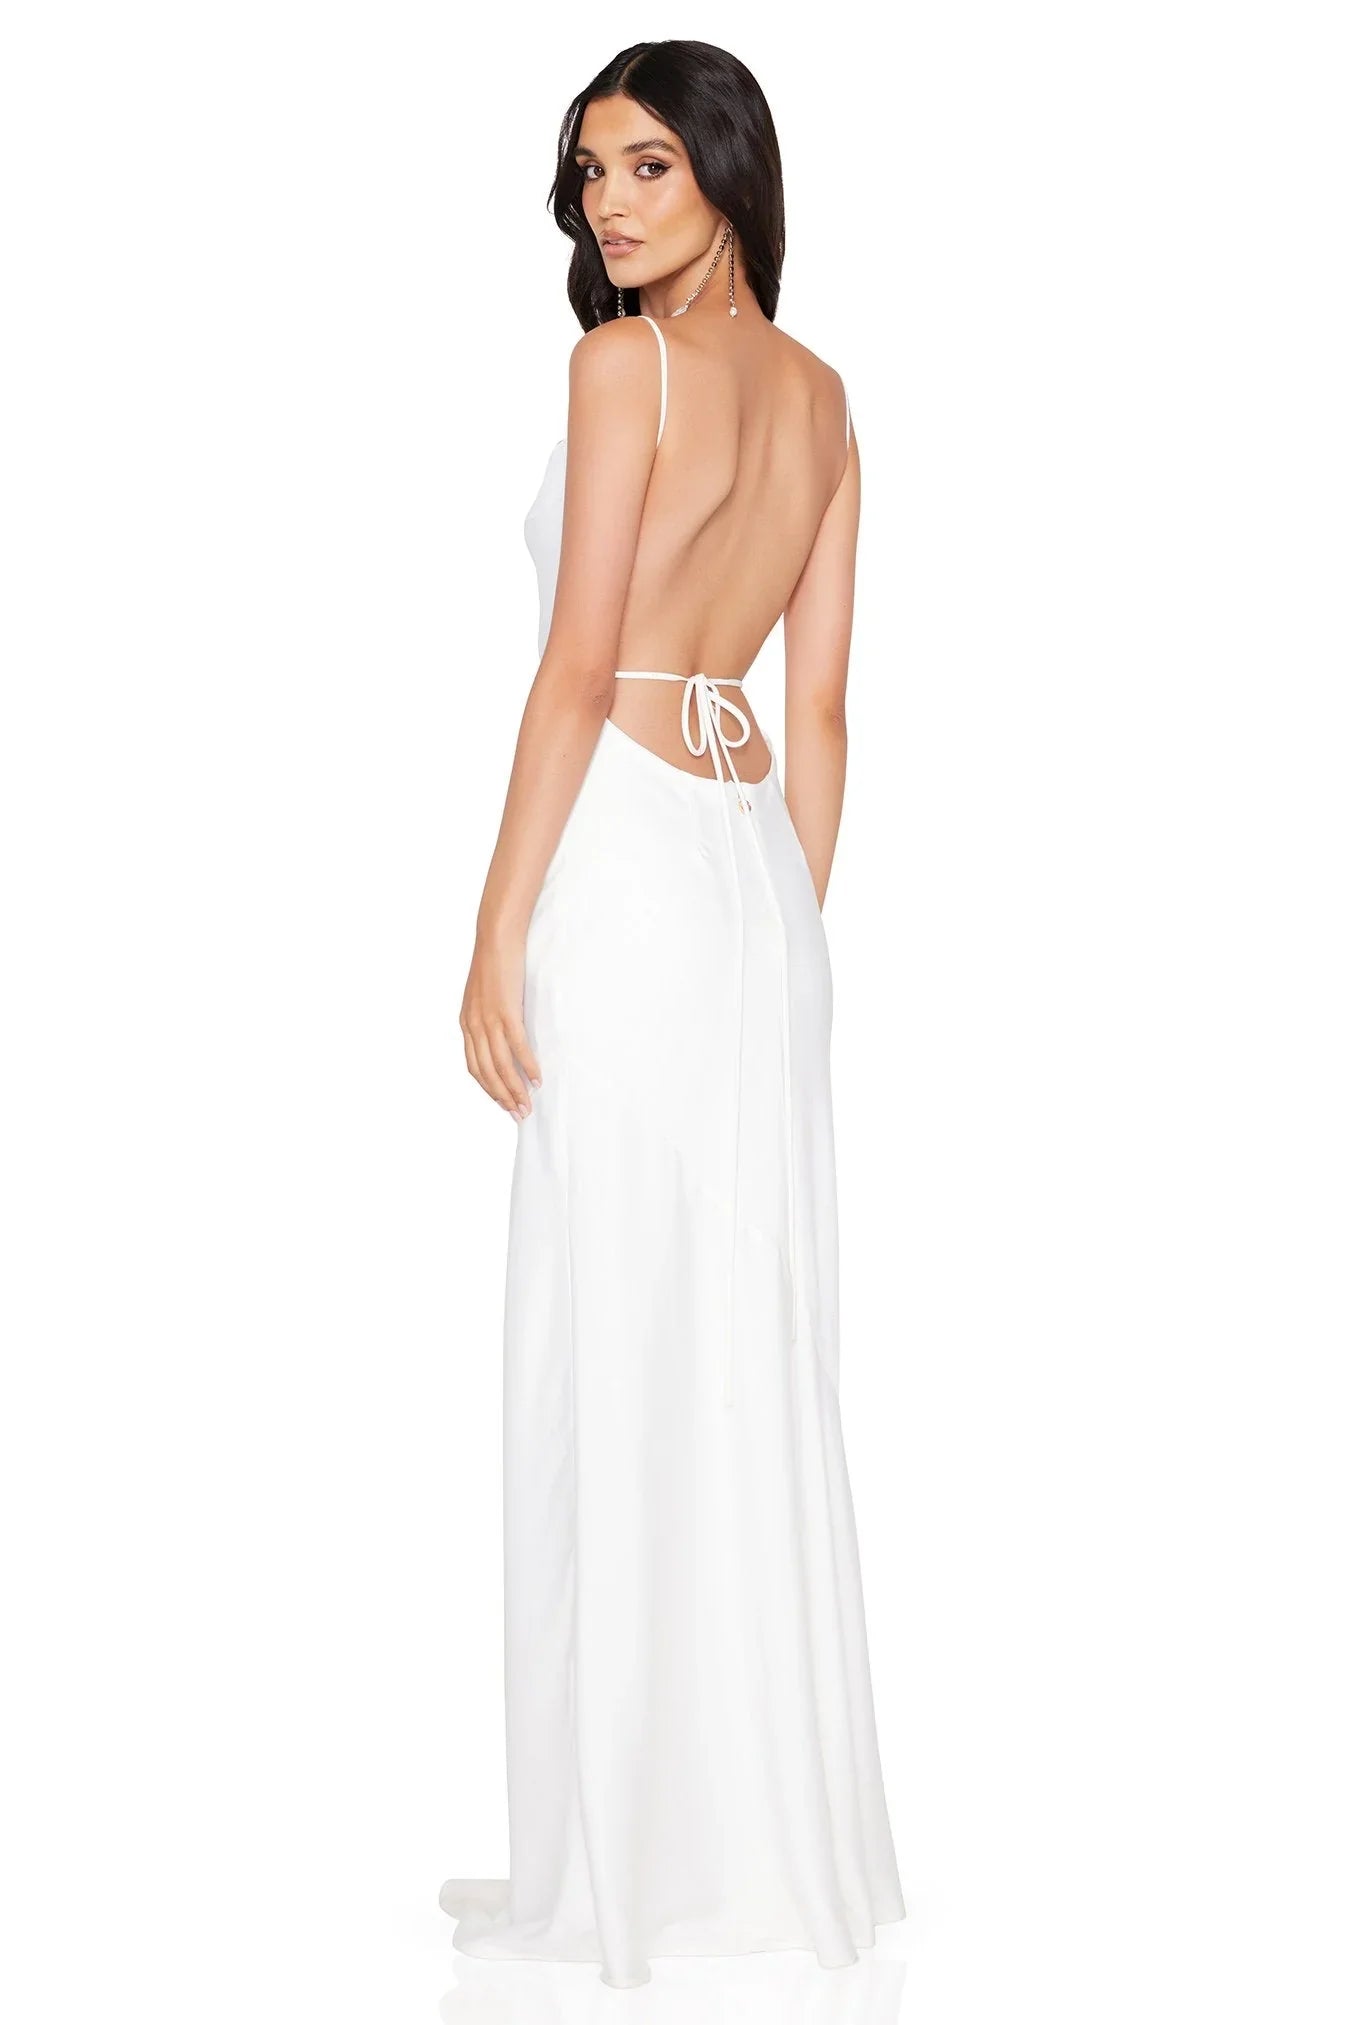 Entice Drape Gown in Ivory